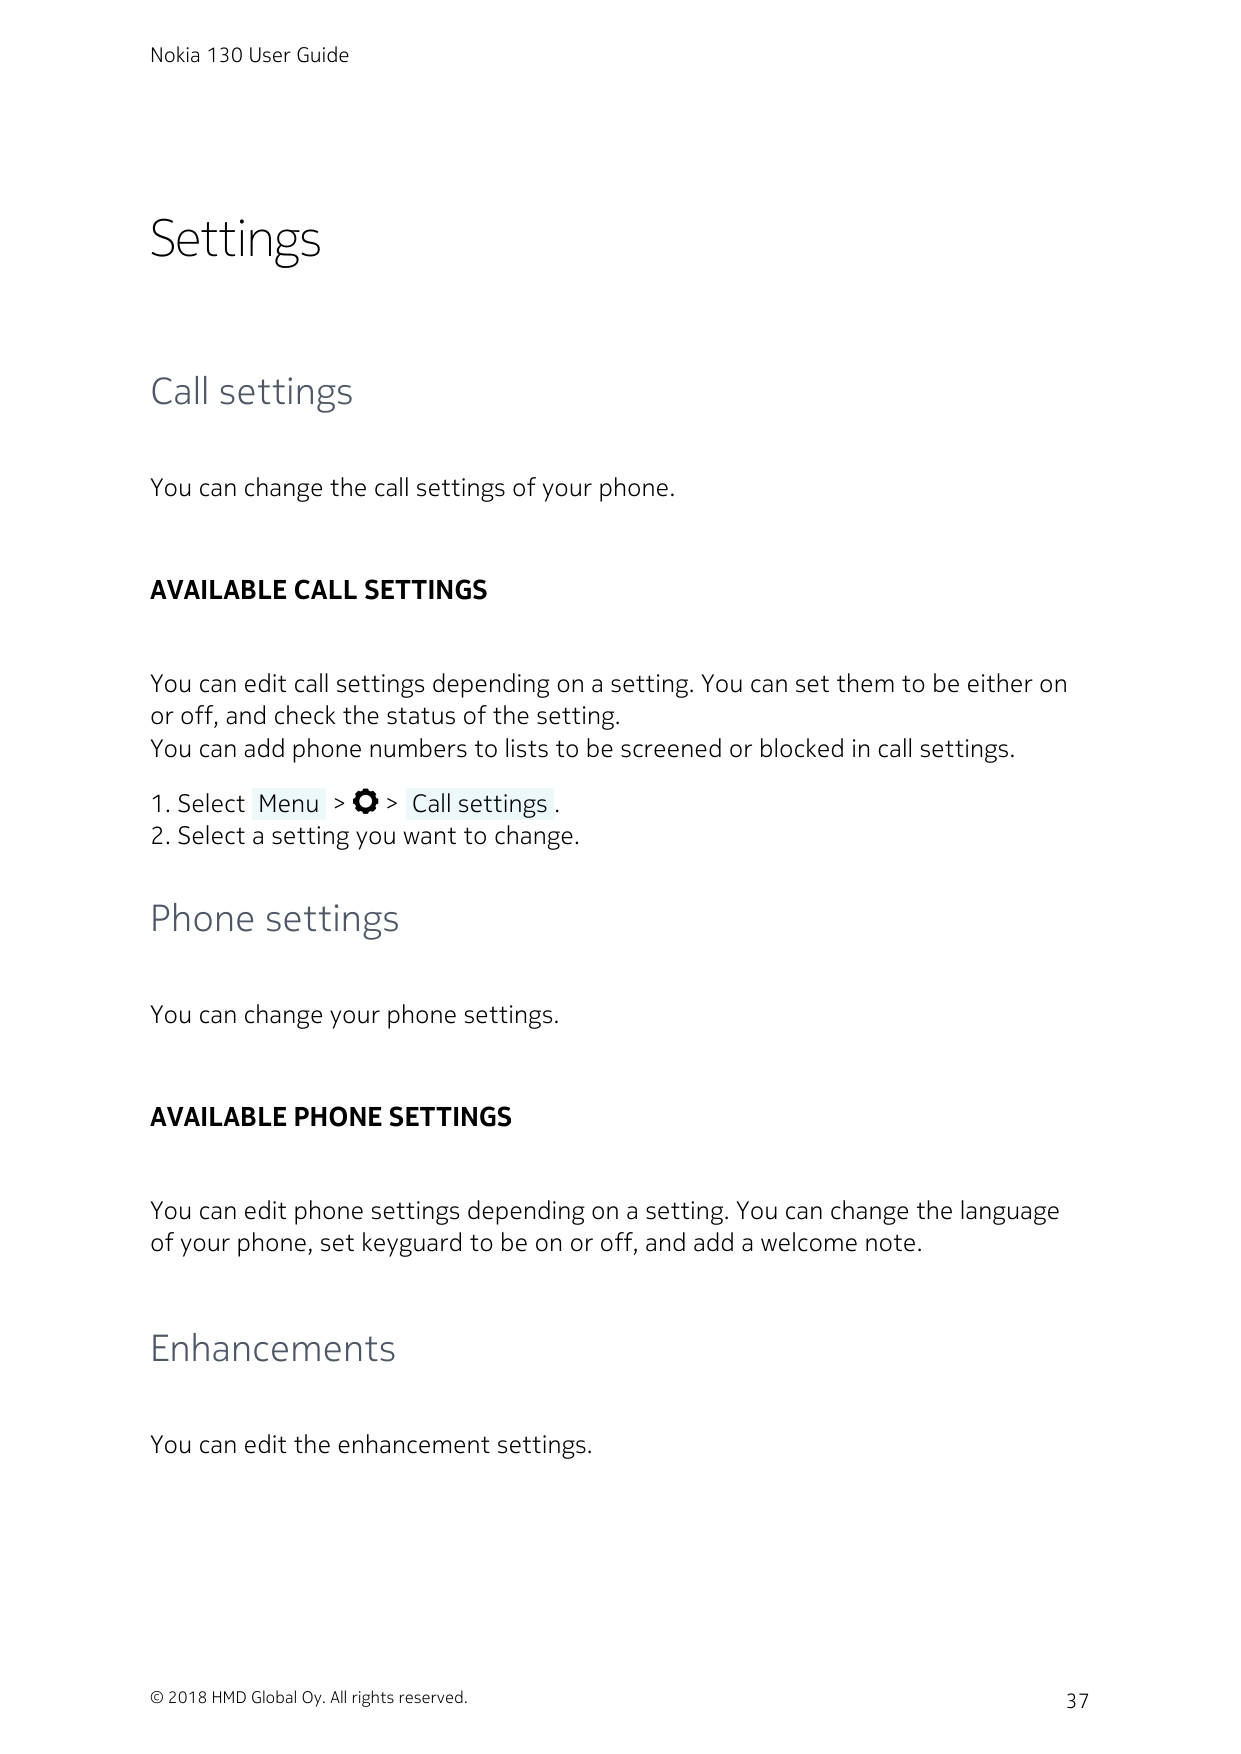 Nokia 130 User GuideSettingsCall settingsYou can change the call settings of your phone.AVAILABLE CALL SETTINGSYou can edit call